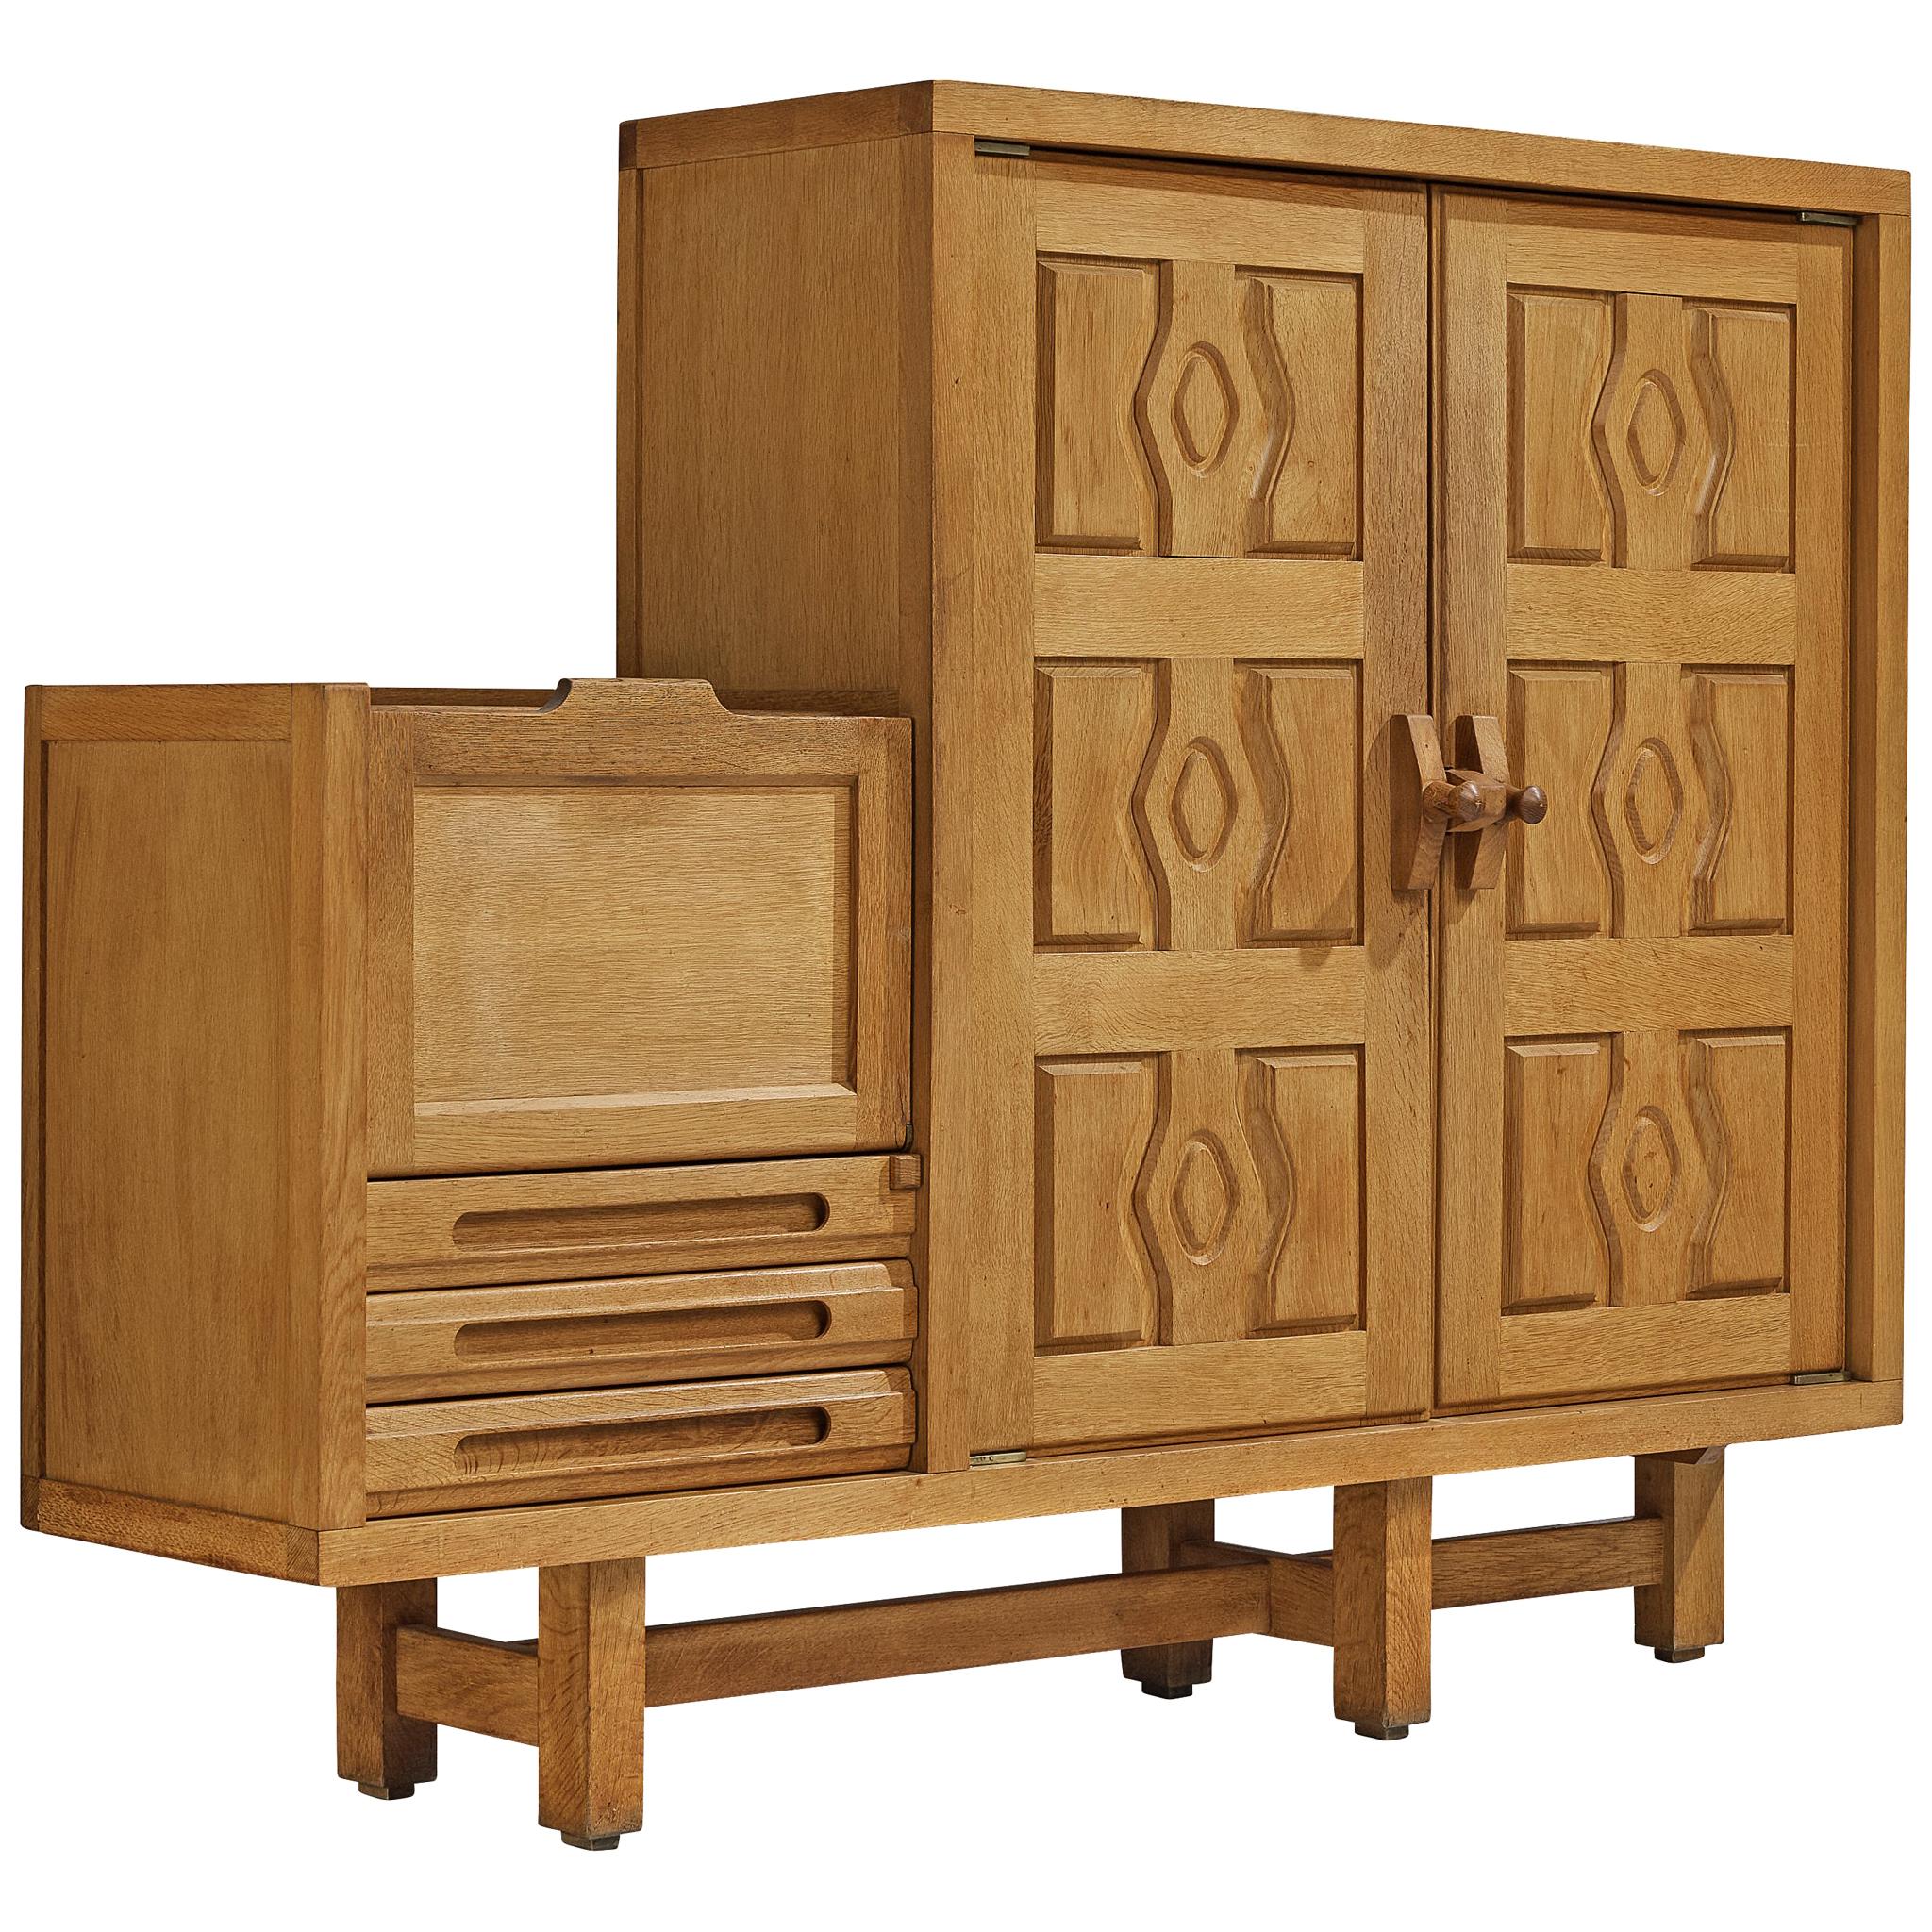 Guillerme & Chambron 'Thierry' Cabinet in Oak